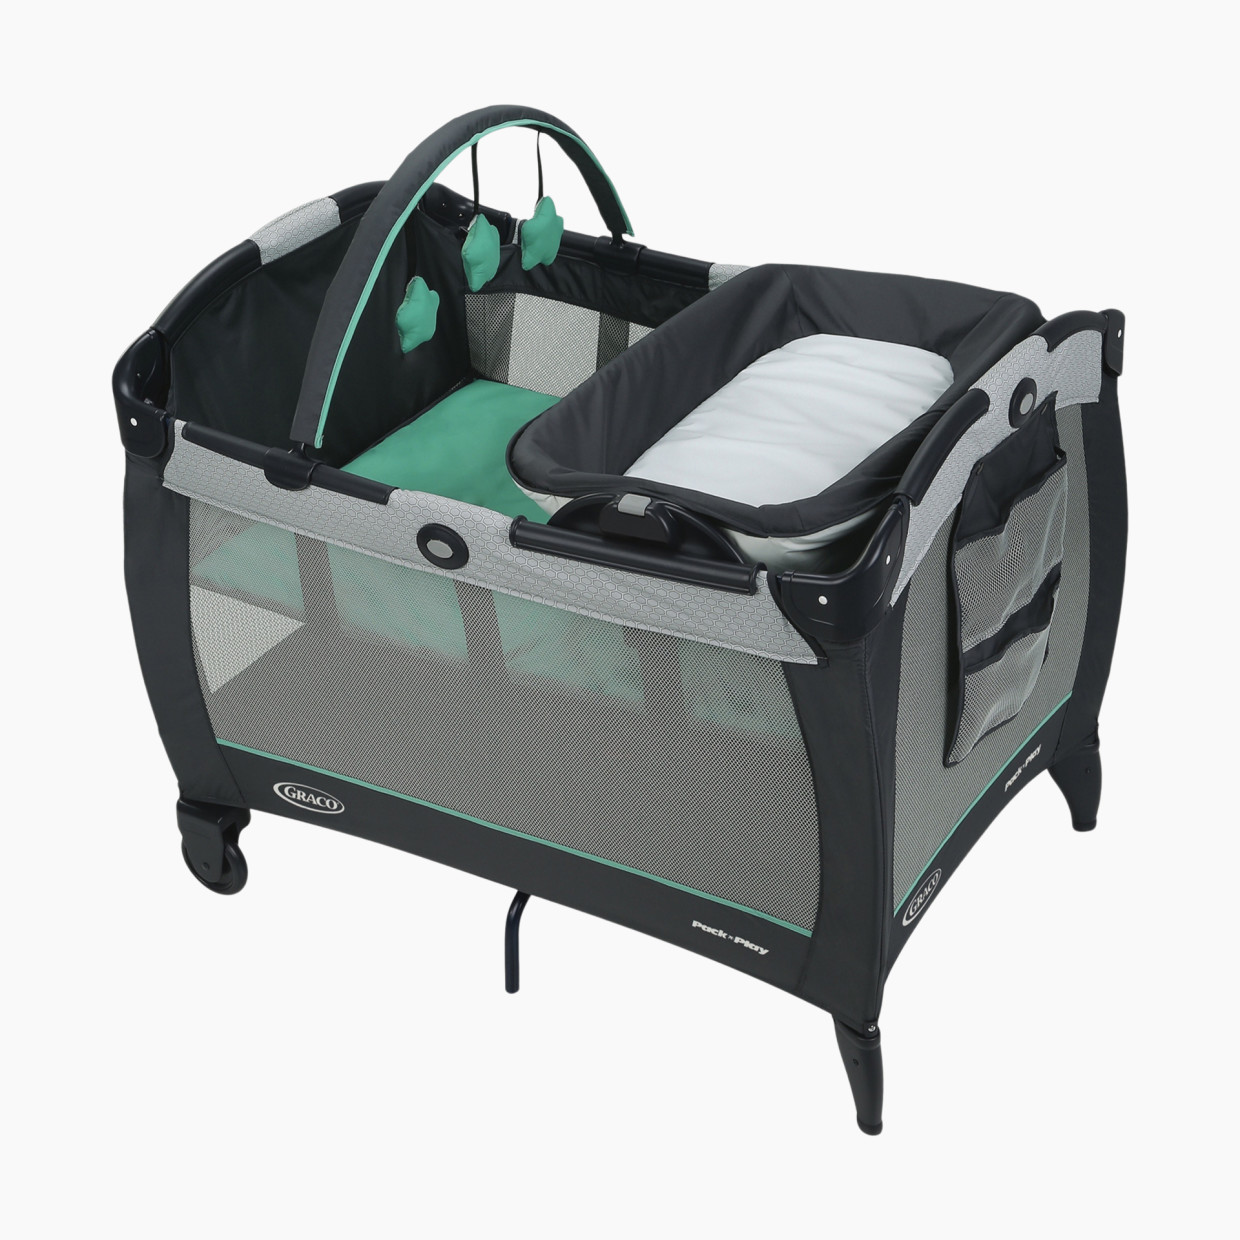 Graco Pack 'n Play Playard with Reversible Seat & Changer LX - Basin.